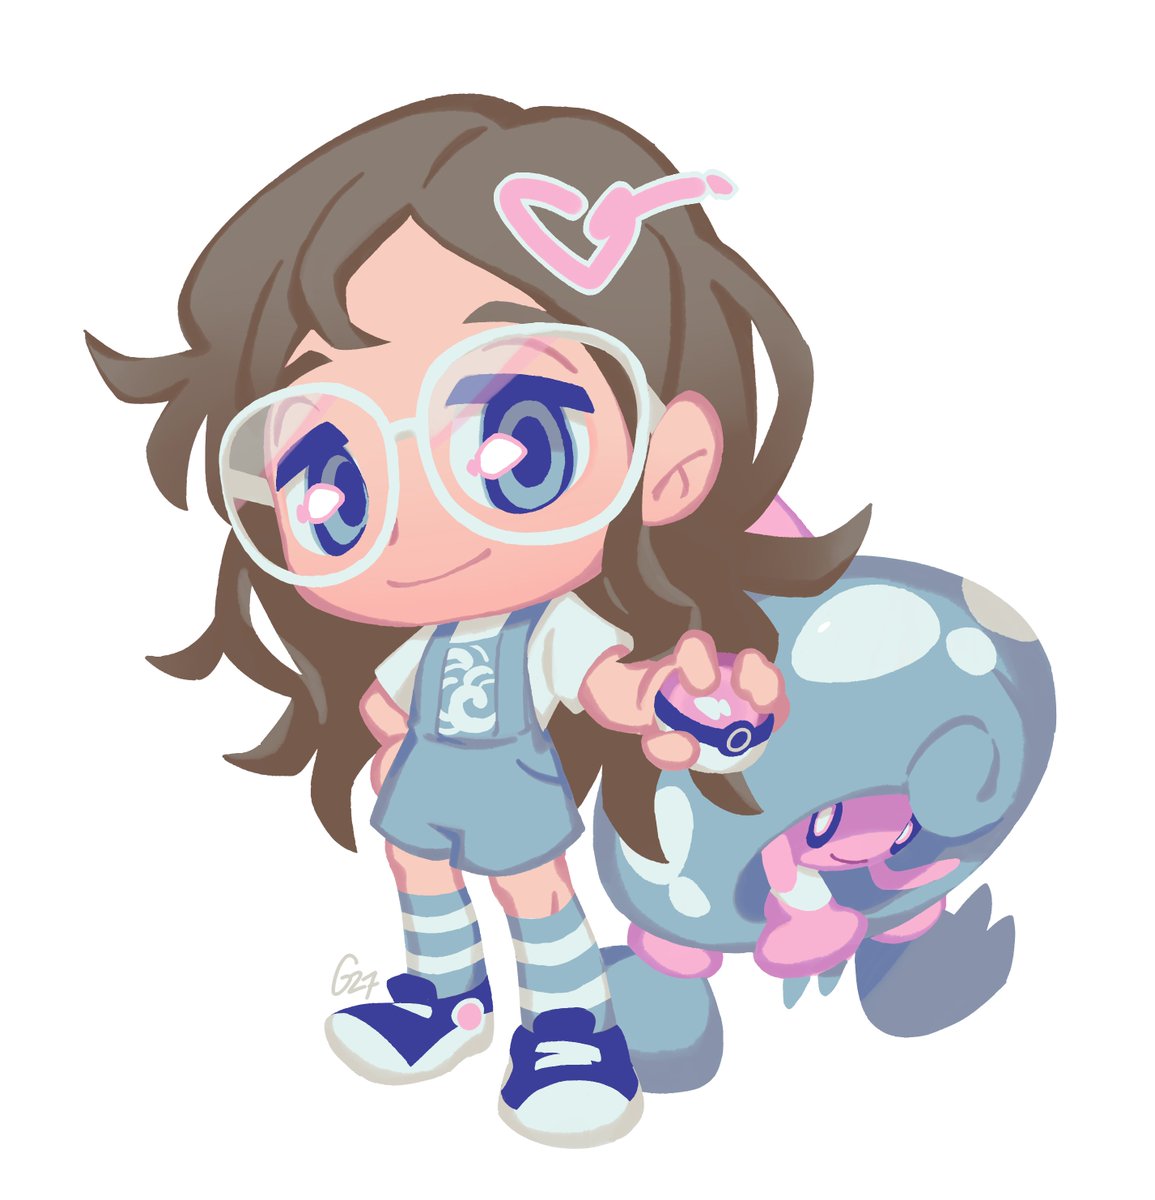 For @Betelplush ! Might open chibi/charms commissions in this style soon if anyone is interested